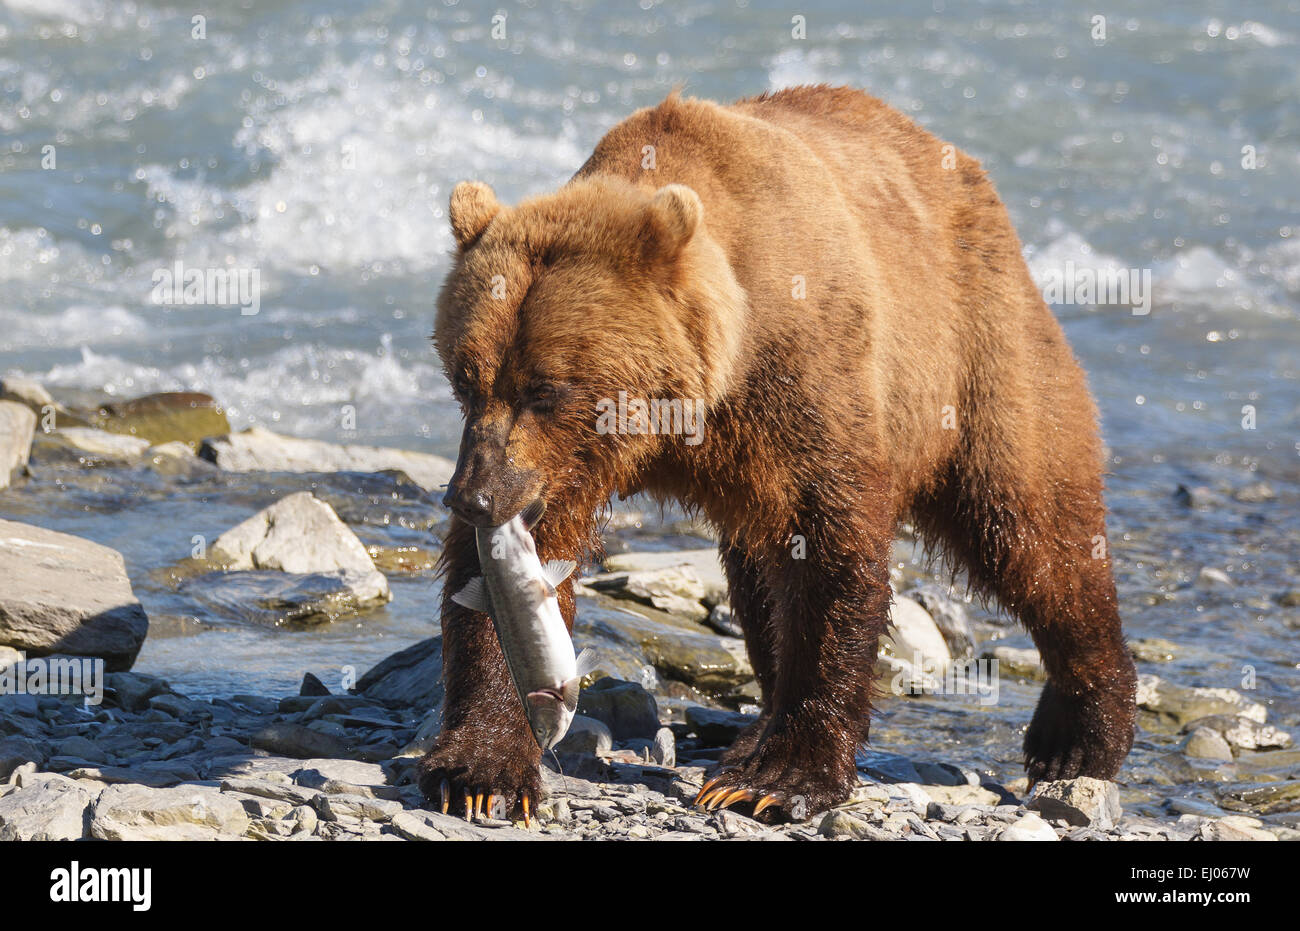 Grizzly bear with salmon at Dayville Road, Valdez, Alaska, United States of America. Stock Photo